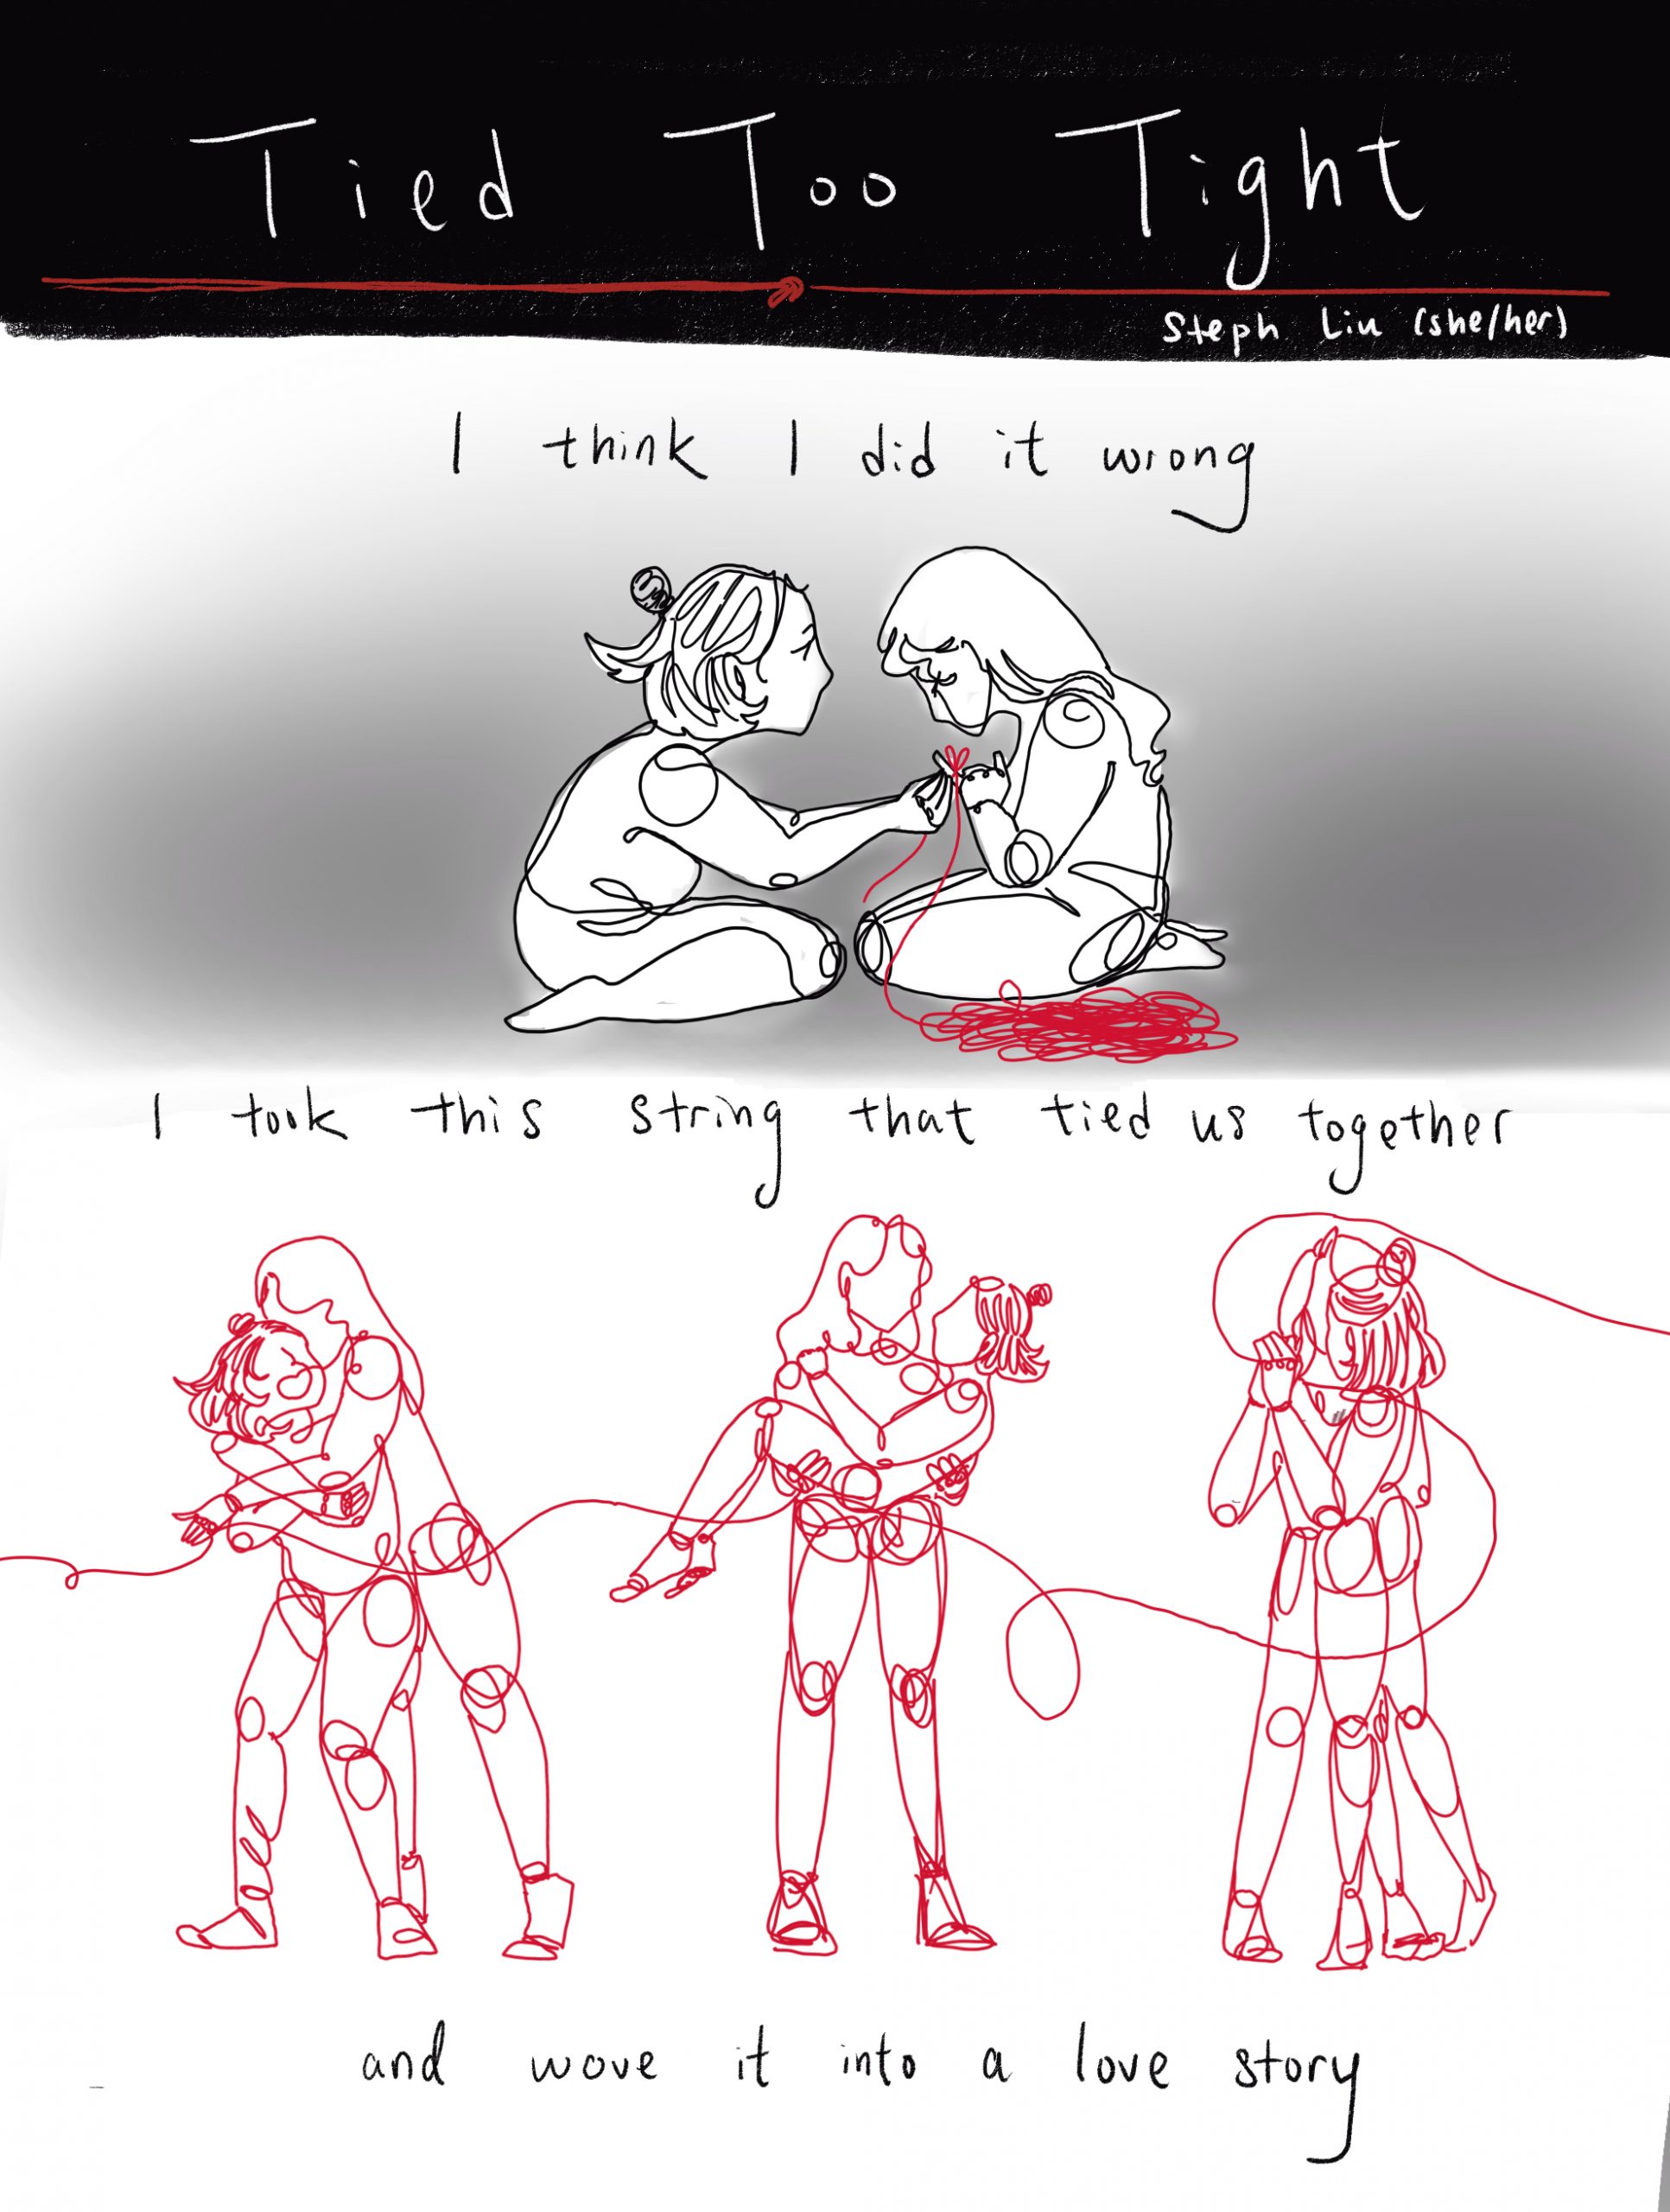 black and white comic by steph liu (she/her) titled "tied too tight". top panel depicts two girls, one with a high bun and the other with long hair. the former ties a red string around the others finger, a pool of thread on the ground beside her. text reads "i think i did it wrong". bottom panel depicts the two, bodies made up of the same string, dancing together and holding each other. text reads "i think i took this string that tied us together and wove it into a love story."